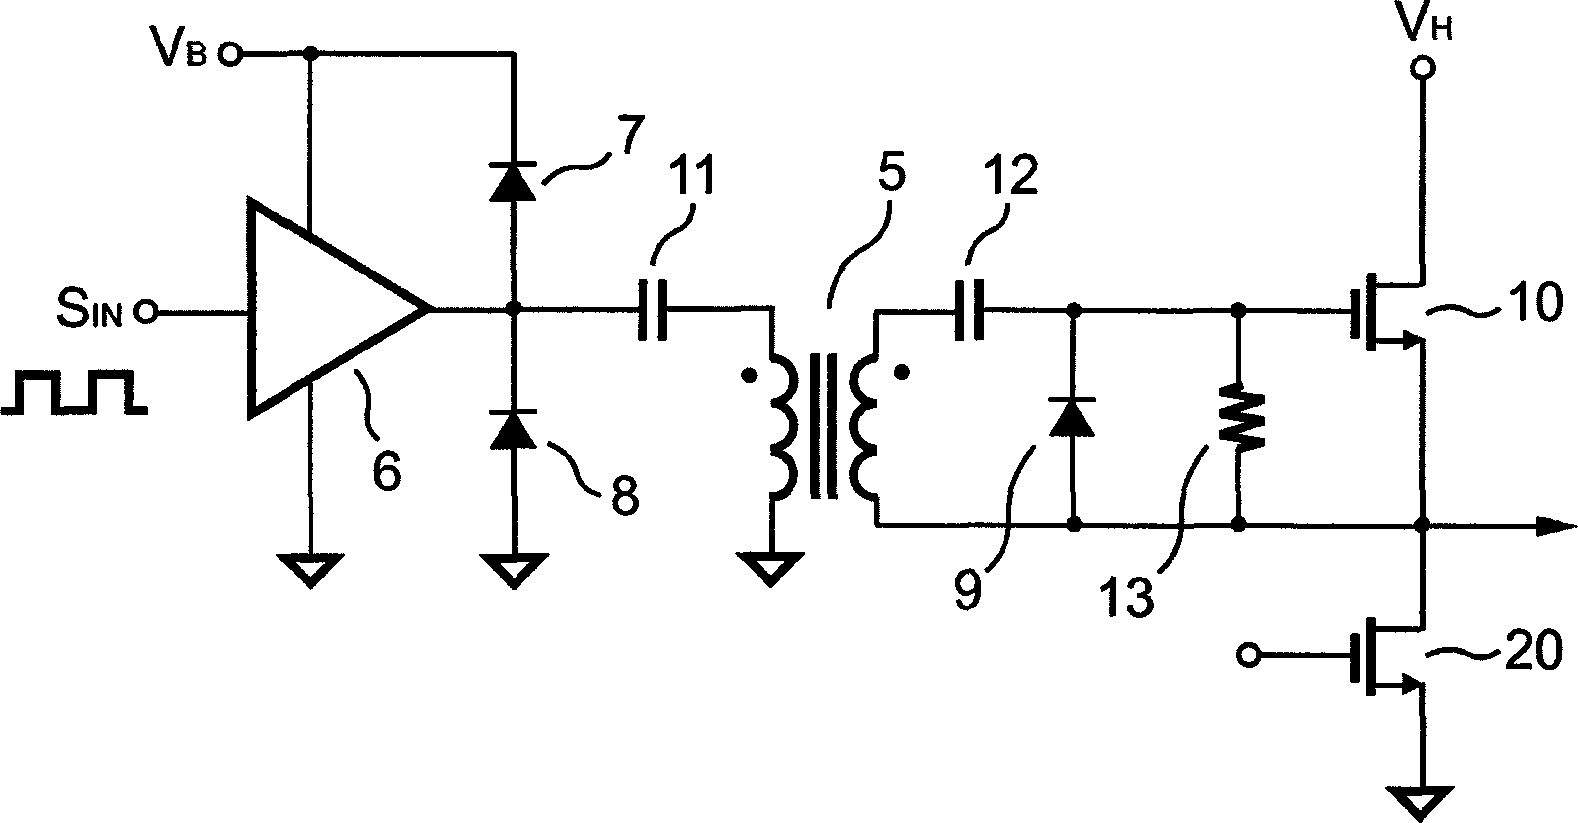 Capacitive high-side switch driver for a power converter